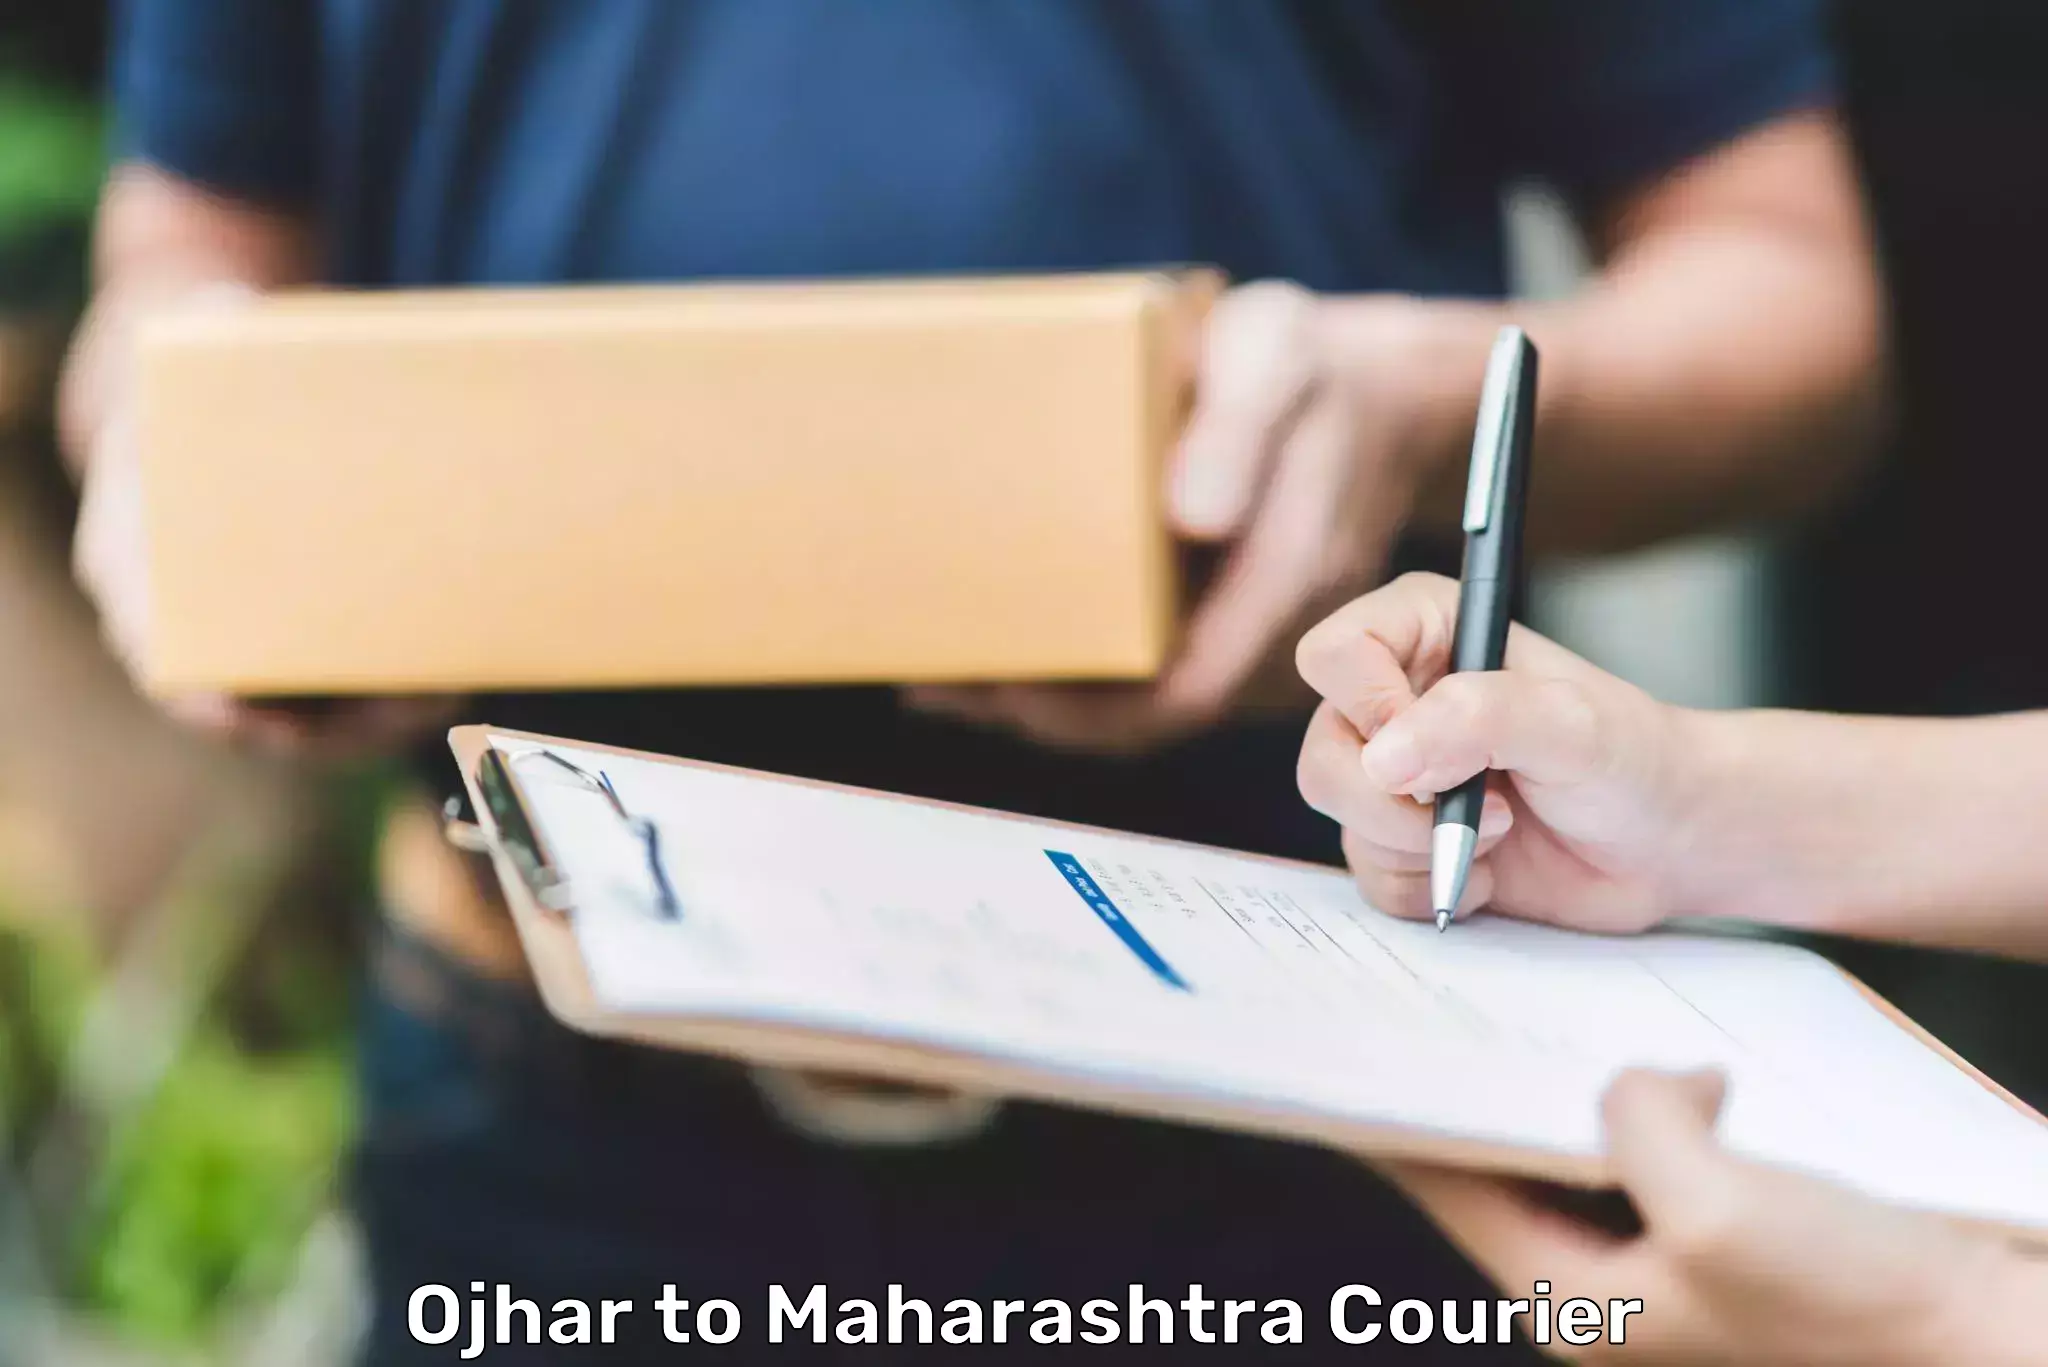 Next-day delivery options Ojhar to Mumbai